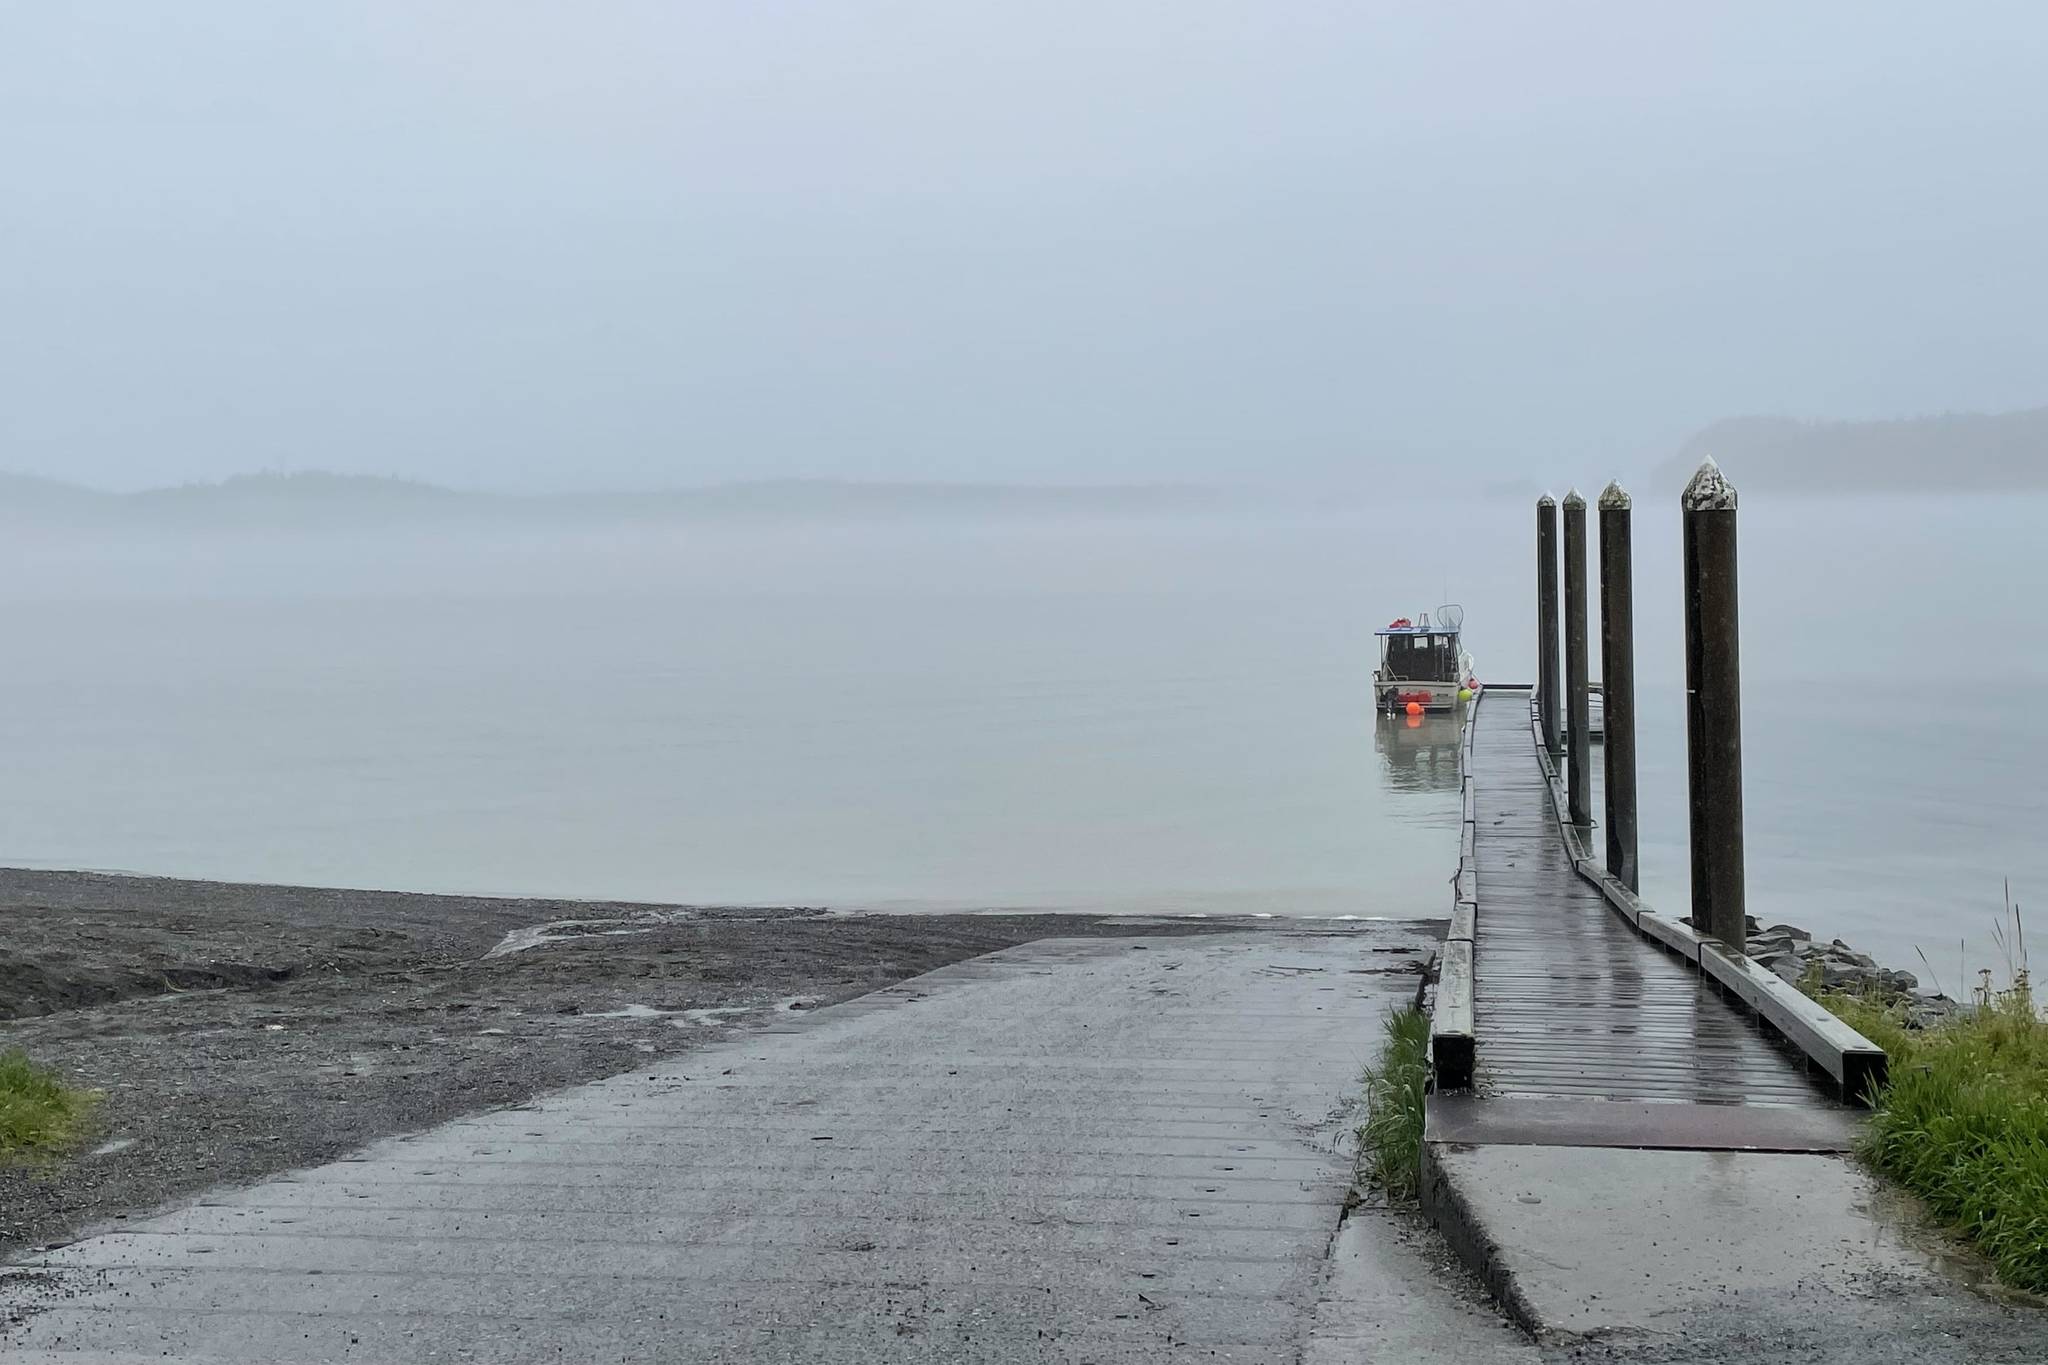 The City and Borough of Juneau’s Docks and Harbors department has issued a public survey as they consider improvements to the North Douglas Boat Launch Ramp, seen here on Aug. 18, 2021. (Michael S. Lockett / Juneau Empire)